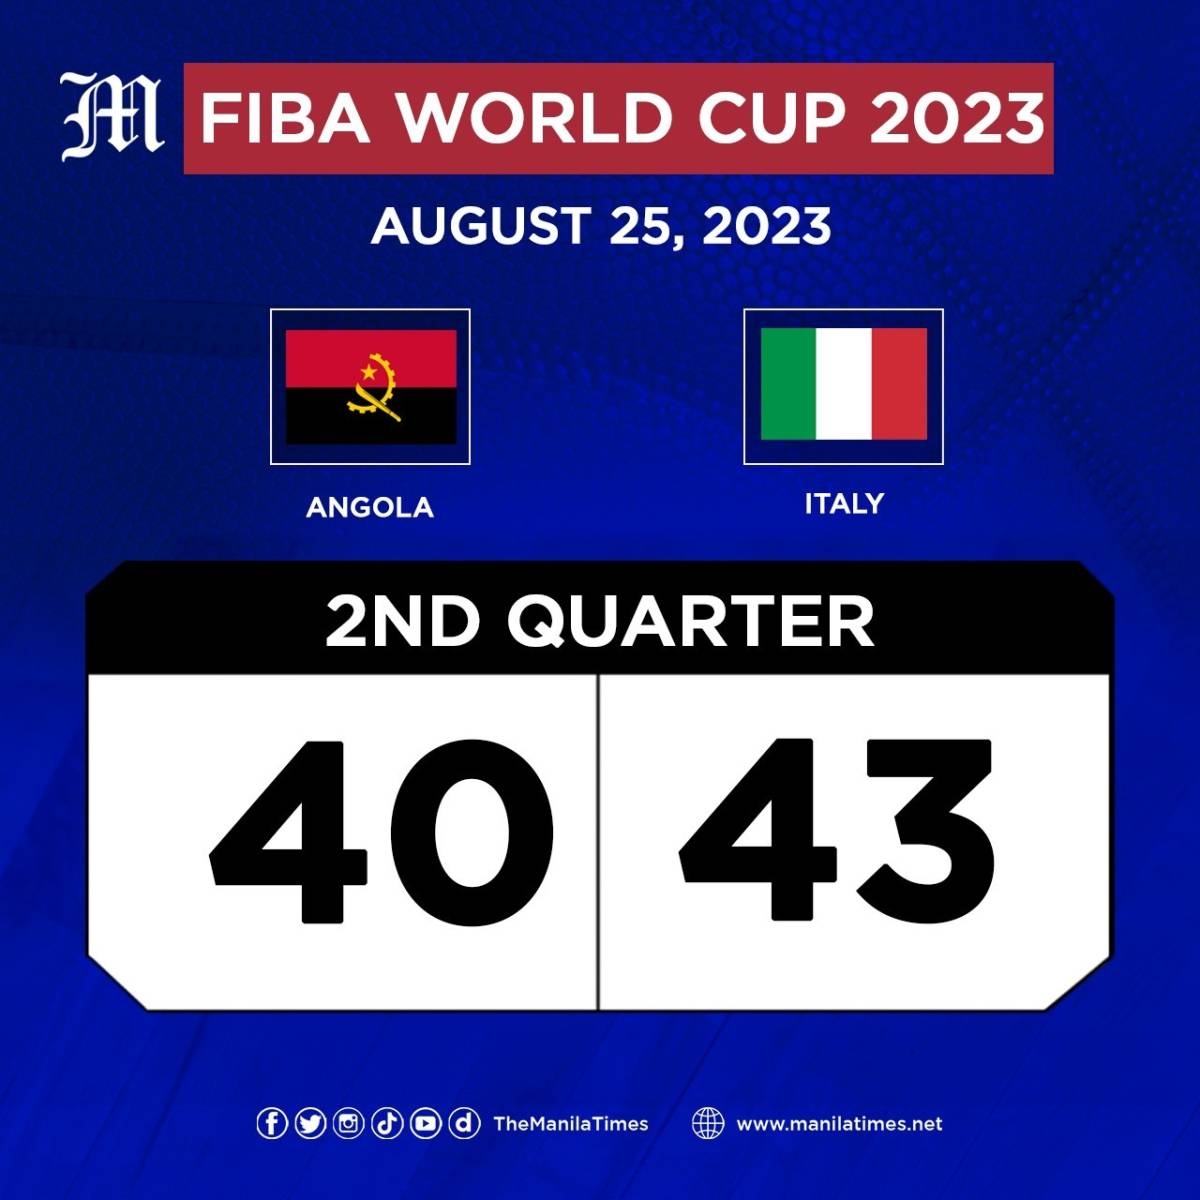 End of 2nd period: Italy 43 - 40 Angola #FIBAWorldCup2023